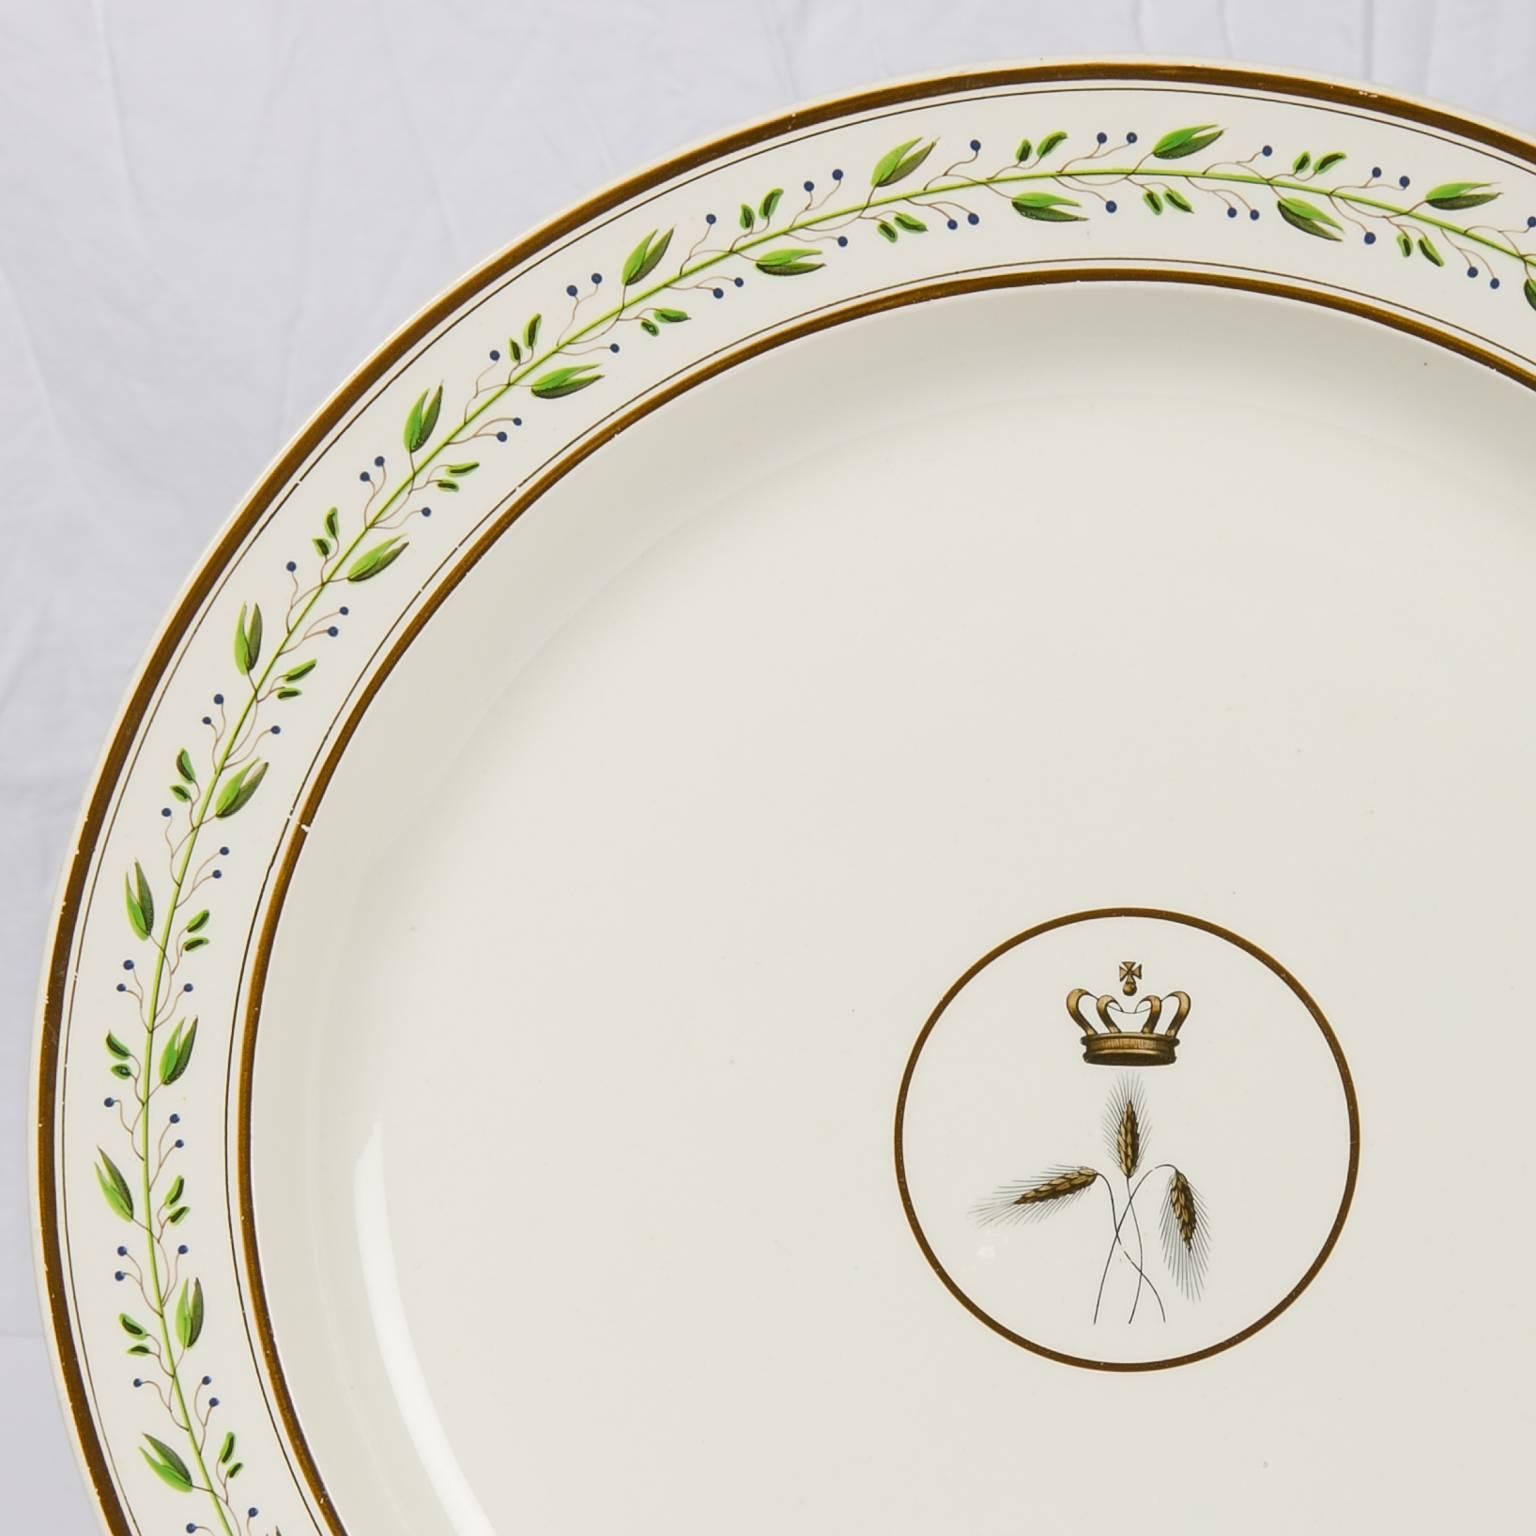 A large Wedgwood charger with a crest at the center showing a crown above three stalks of wheat.
The crown is similar although not exactly replicating St Edward's Crown, the crown of British Royalty since the 13th century. The crown represents the